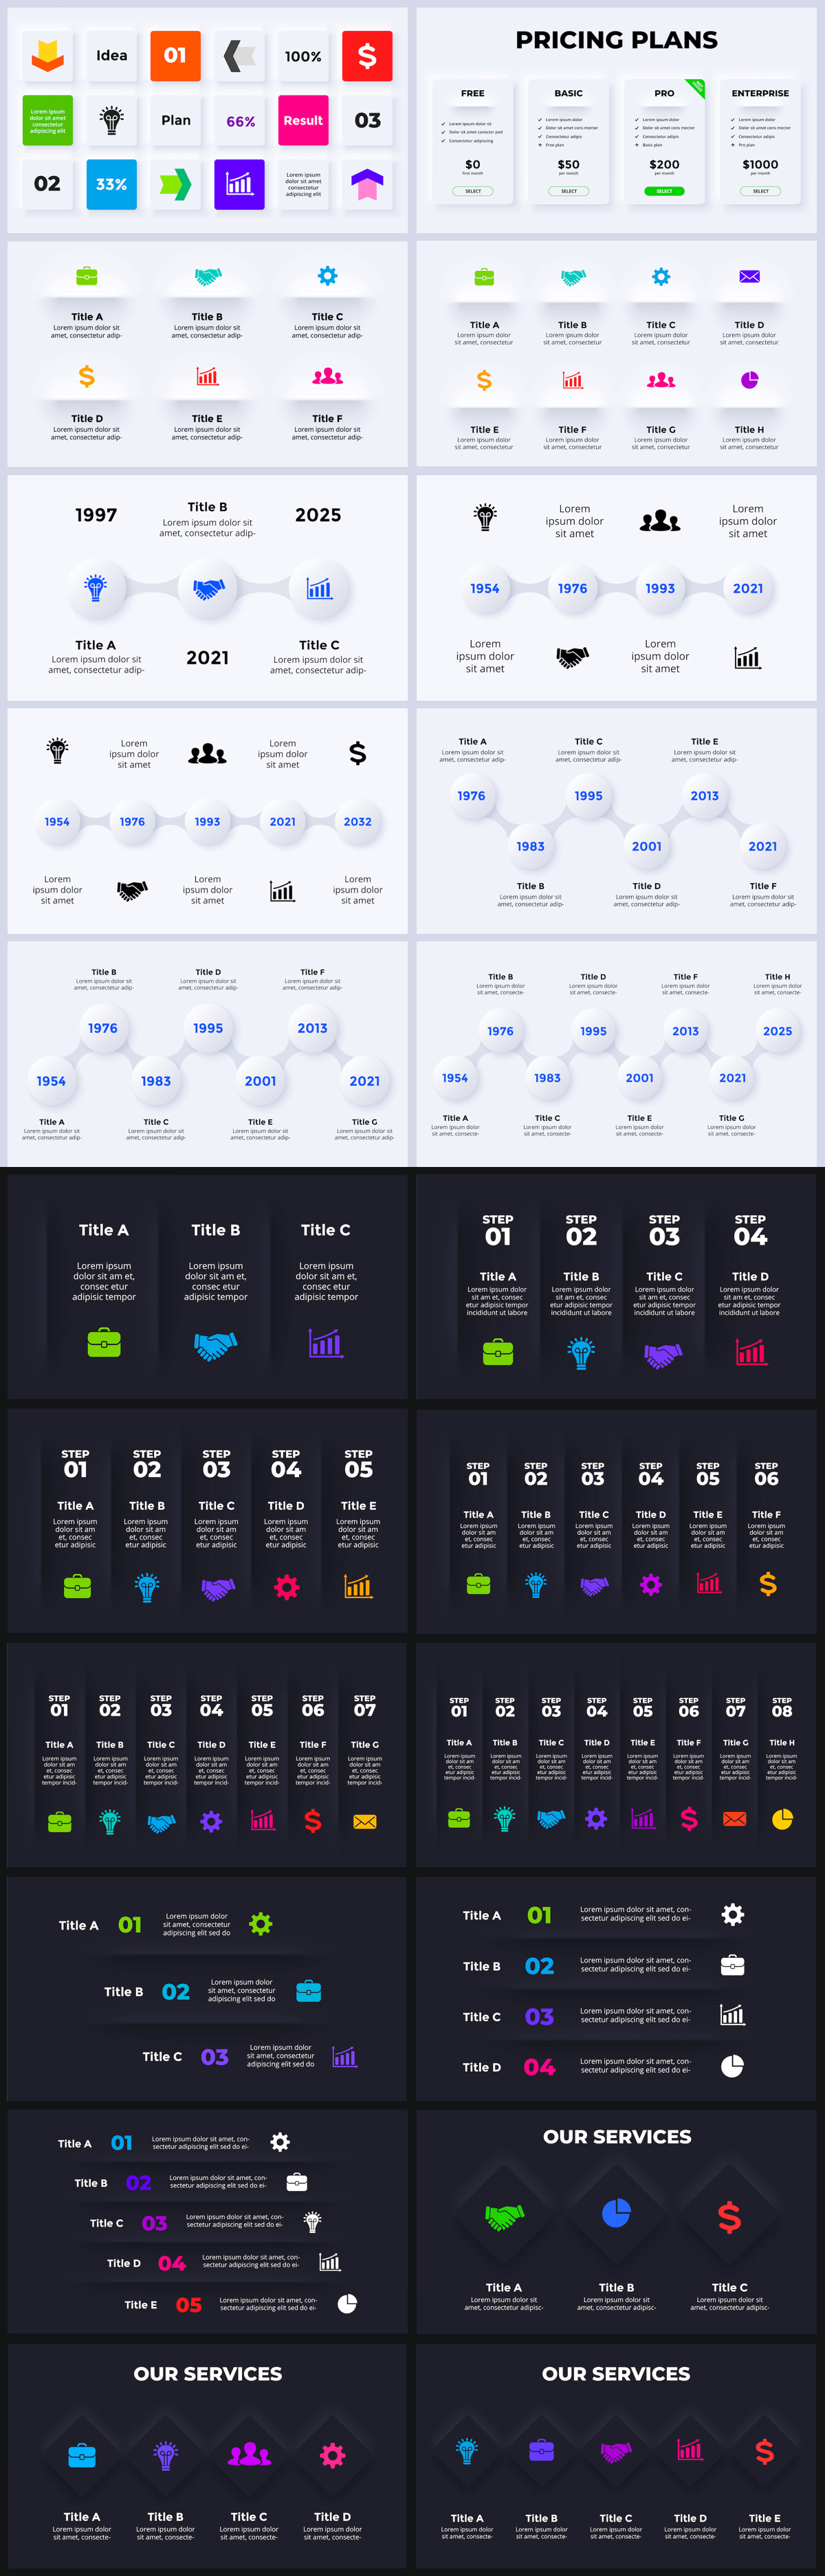 Wowly - 3500 Infographics & Presentation Templates! Updated! PowerPoint Canva Figma Sketch Ai Psd. - 323